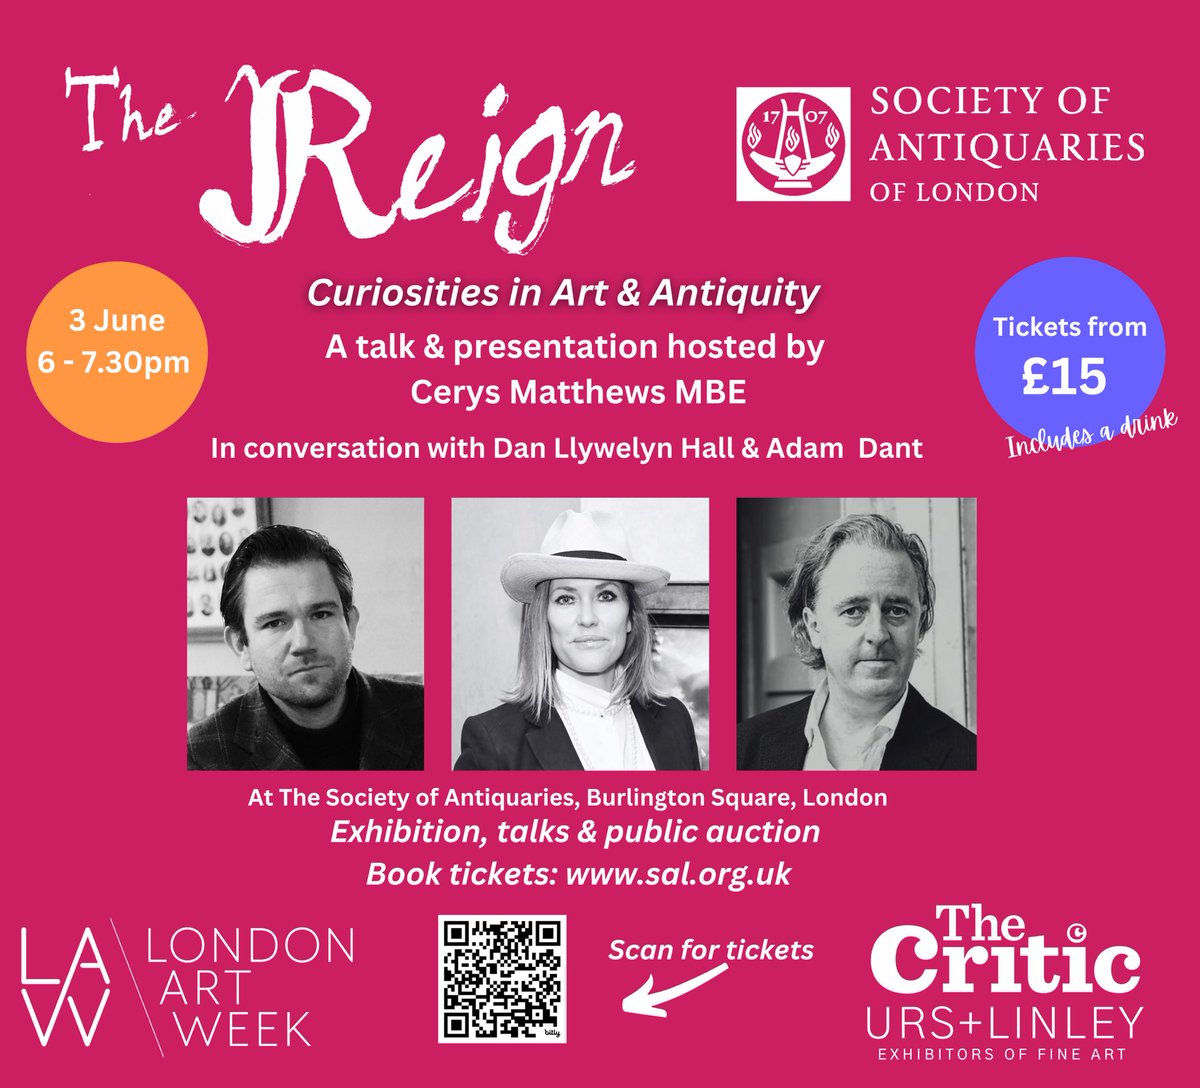 Don't miss out on our Q&A event for our upcoming exhibition, The Reign, chaired by the @cerysmatthews herself, and with moi & Adam Dant! Book before 24 May and tickets are £15! sal.org.uk/event/reign-qa/